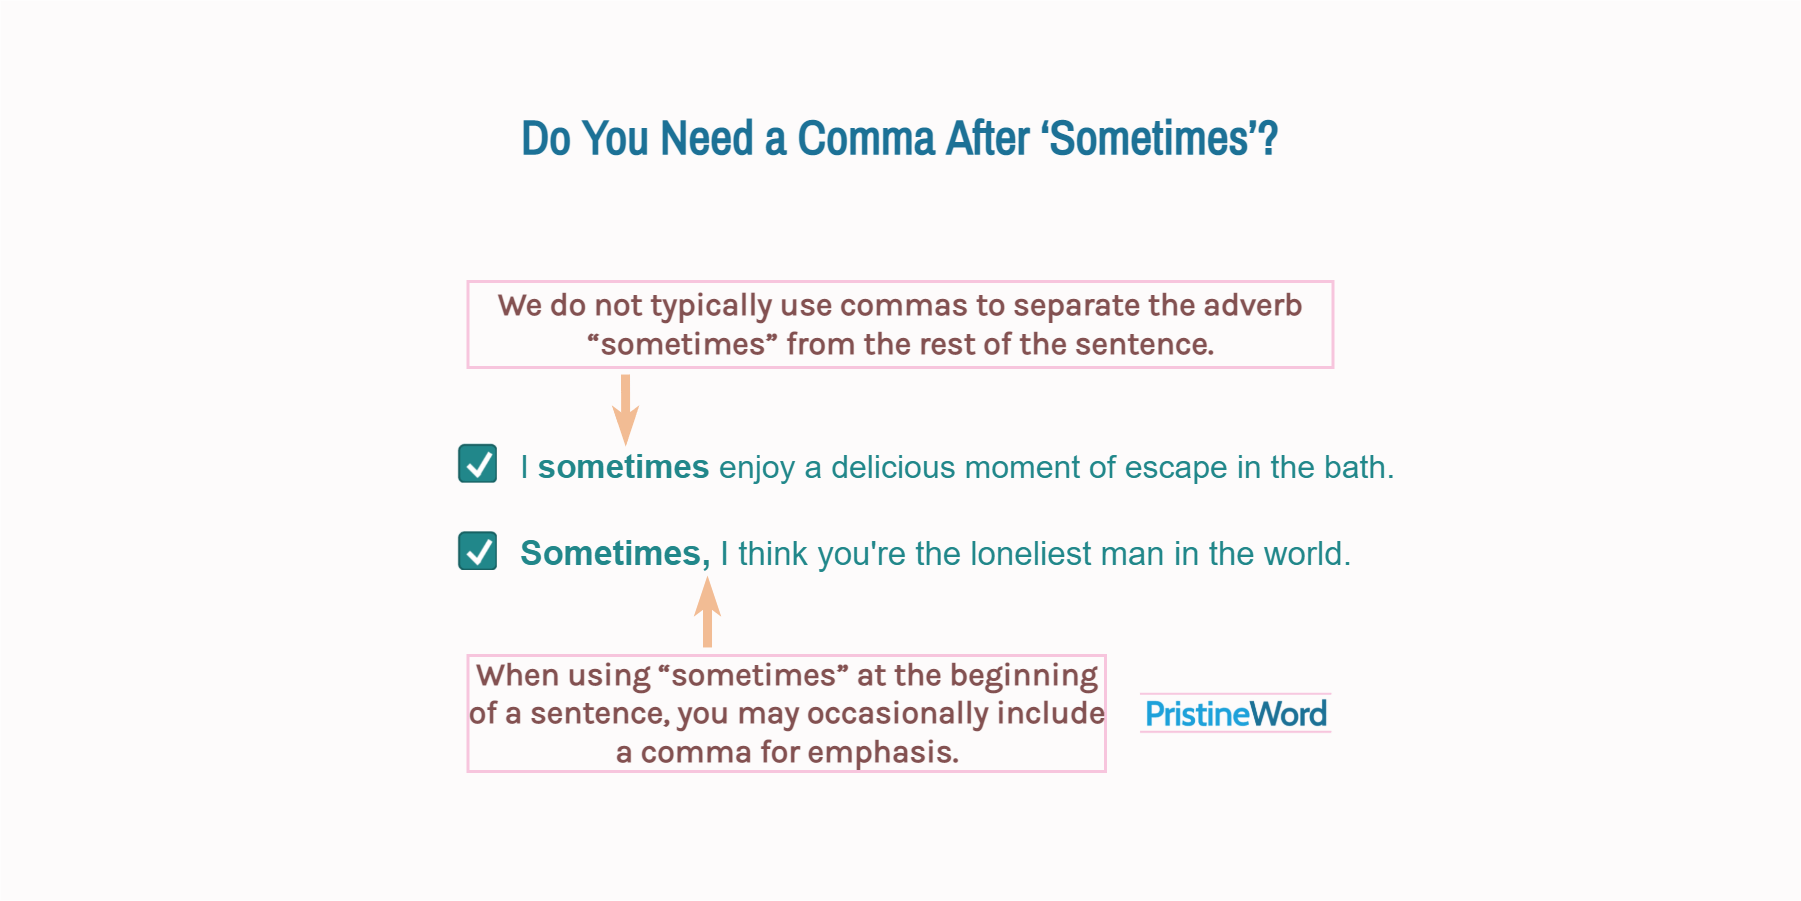 Do You Need a Comma After 'Sometimes'?